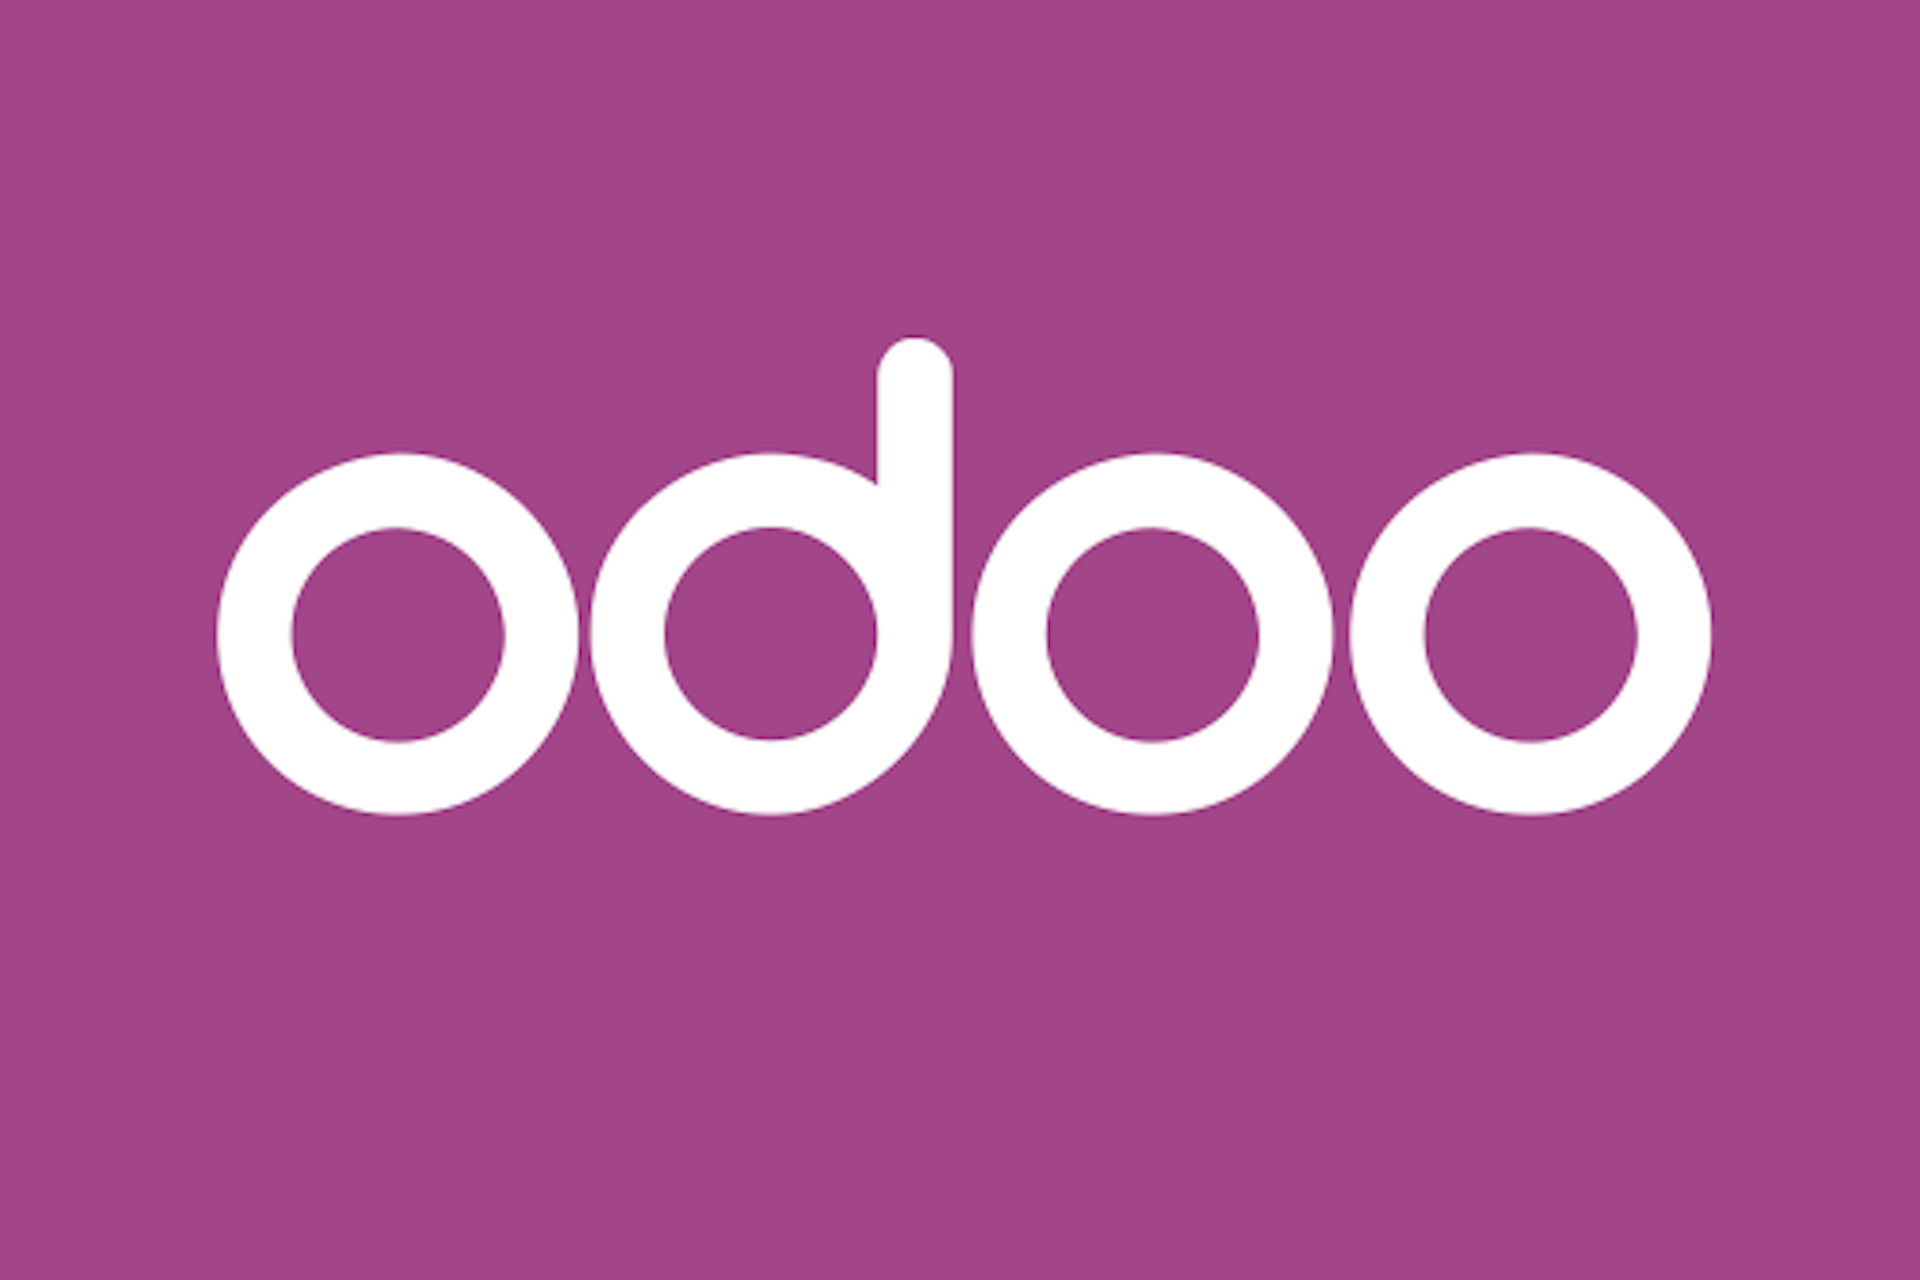 You are currently viewing Odoo – eine App für jede Situation